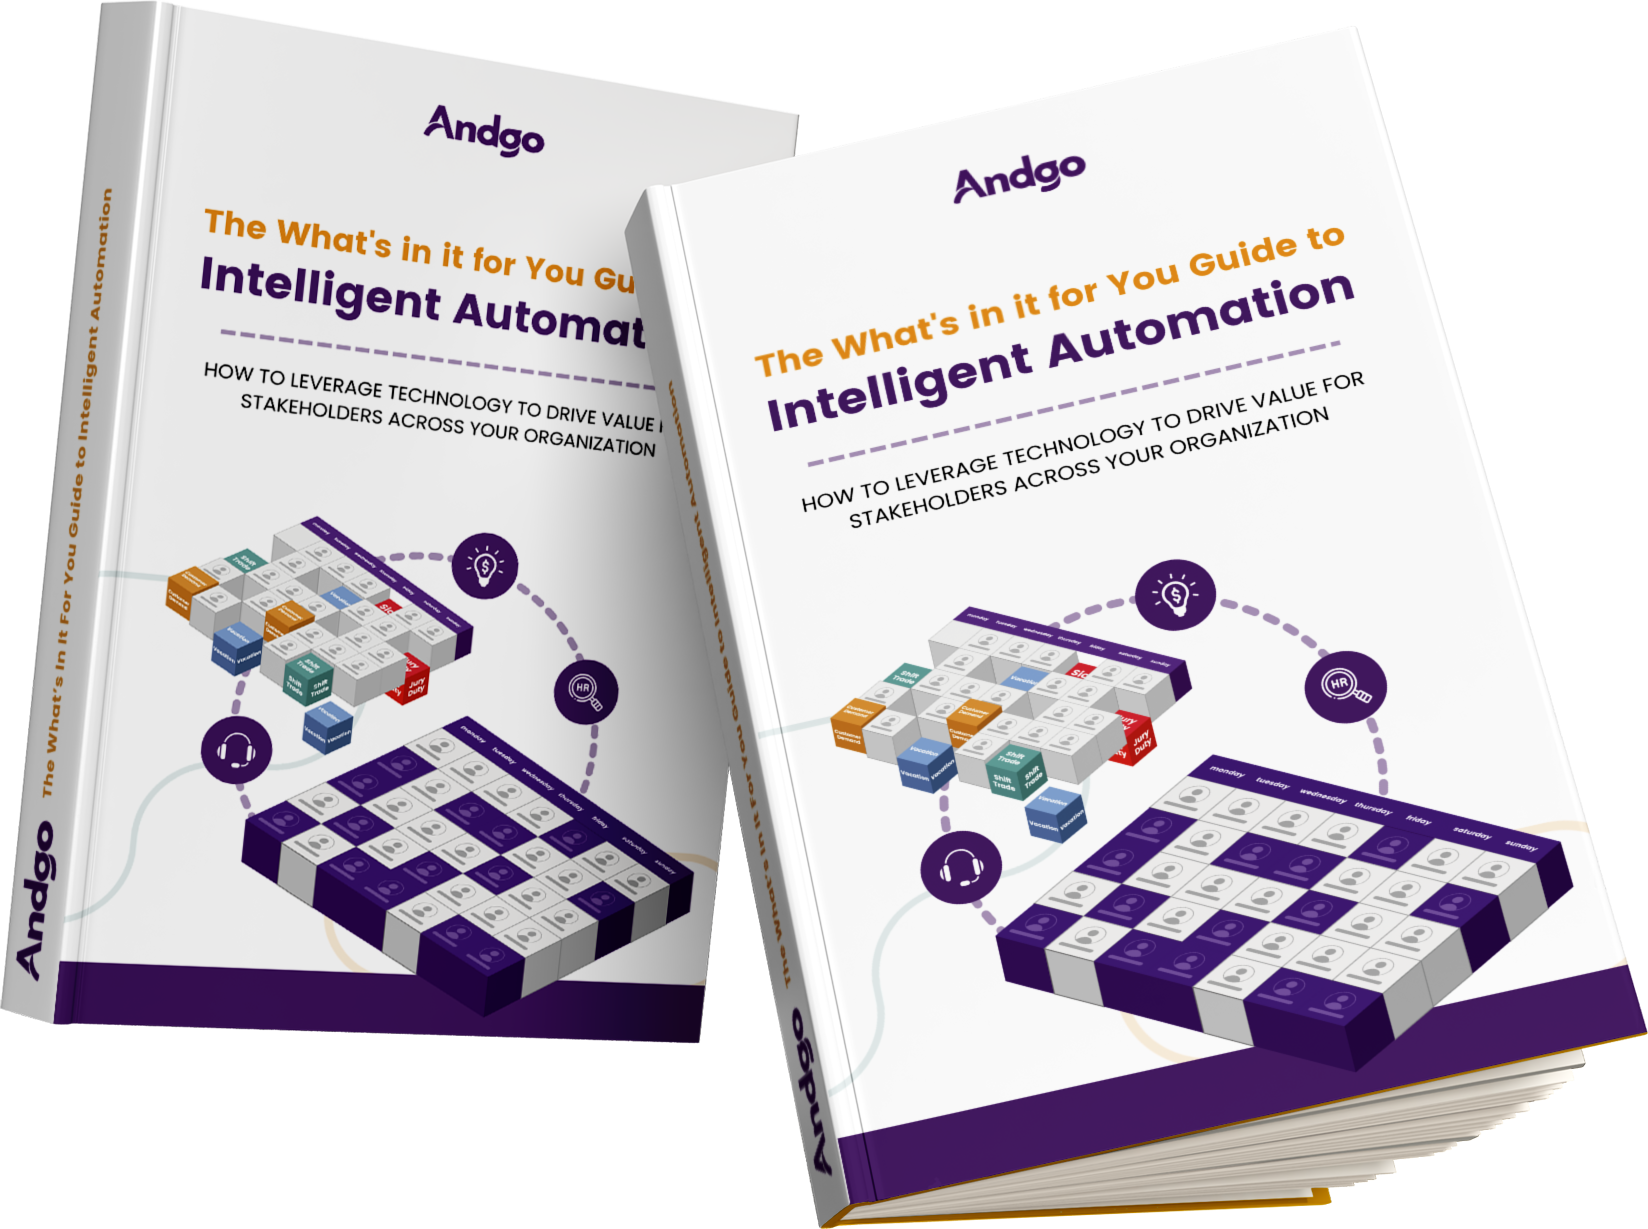 andgos intelligent automation ebook title on book cover graphic